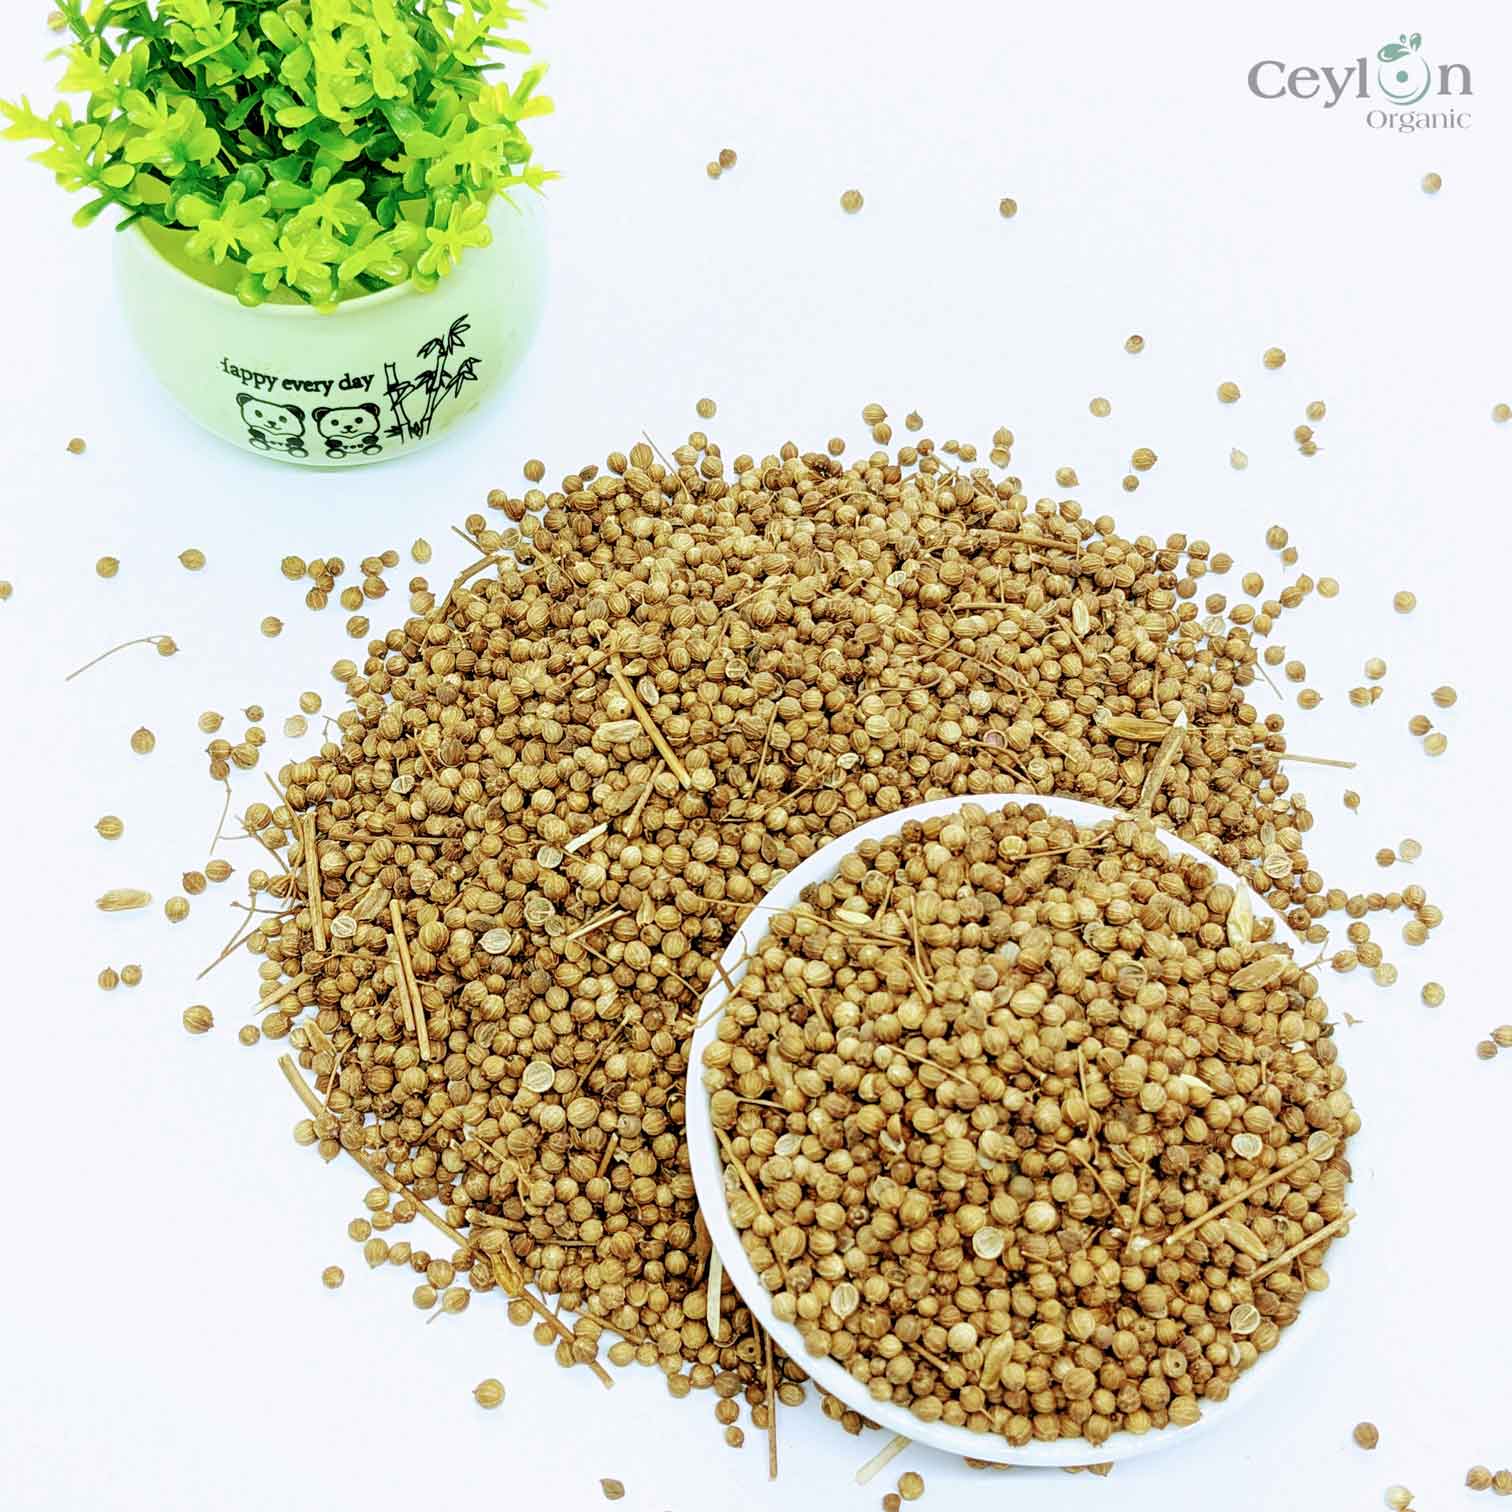 1kg+ Coriander Seeds, Cilantro, Chinese parsley, dhania, Best Quality Spices | Ceylon Organic-5